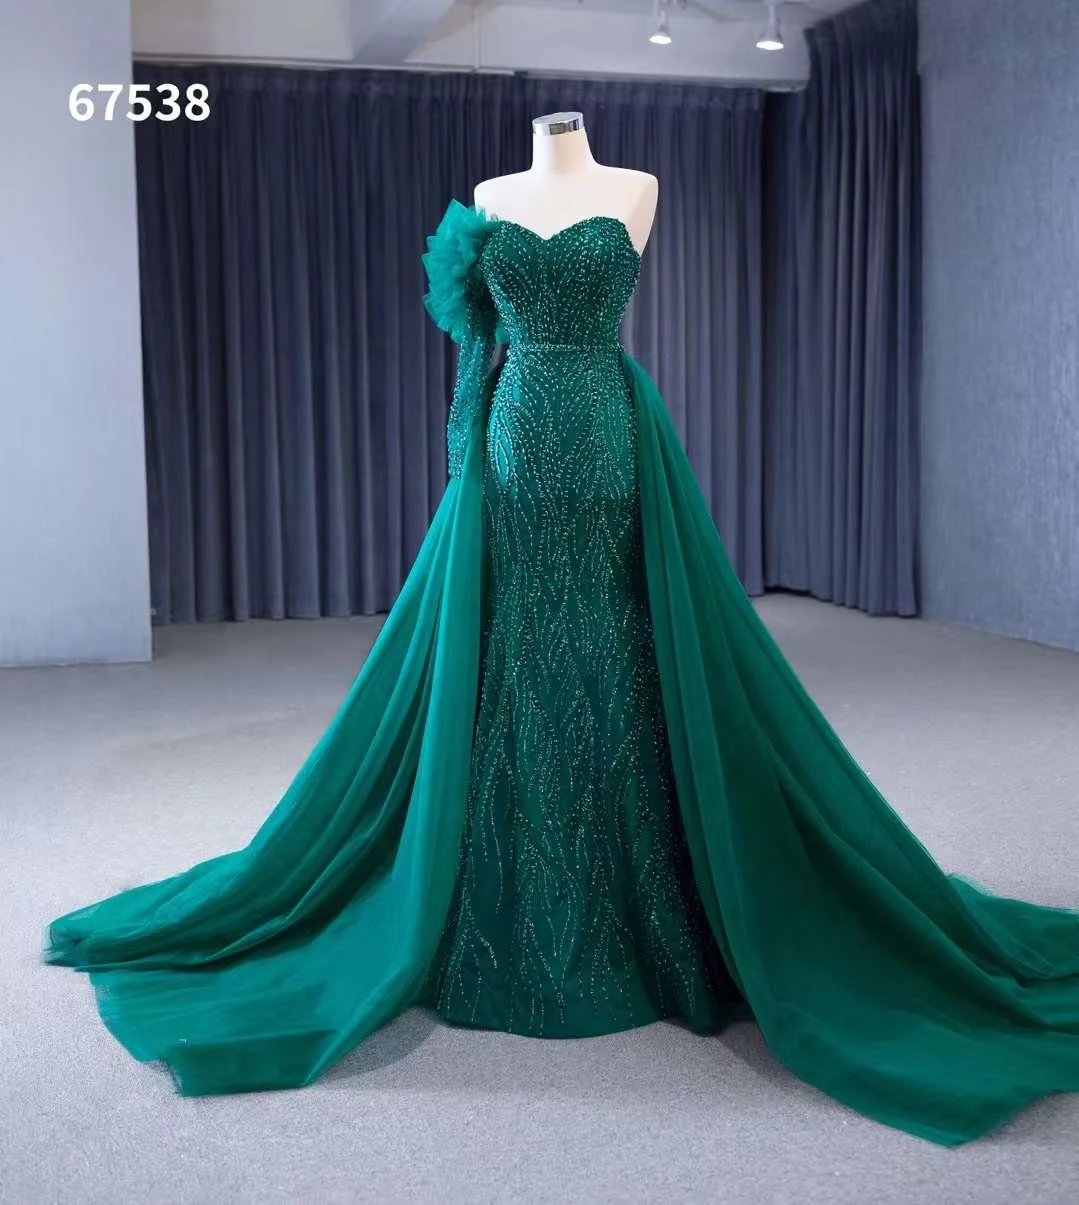 

Jancember RSM67538 Green Mermaid Prom Evening Dresses With Detachable Train